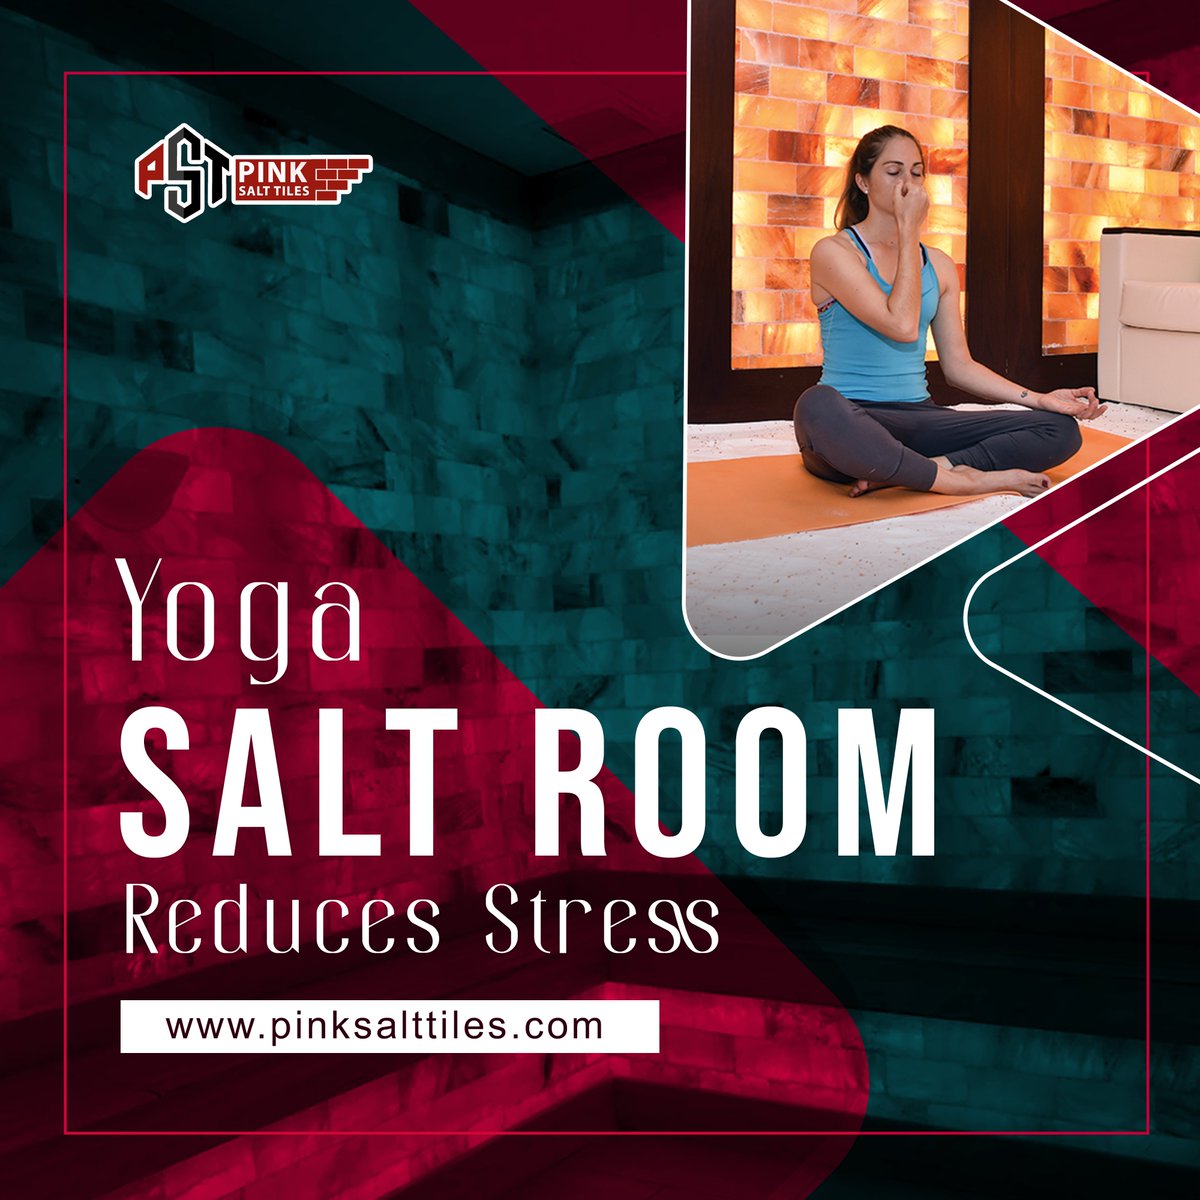 Would you like to take a yoga class in a salt room with walls covered in Himalayan salt crystals where a dry salt vapour is pumped into the air? 🔥
Visit our Website;
pinksalttiles.com
👆👆👆
#yoga #yogainspiration  #yoganearme #saltyoga #yogastrength  #pinksalttiles